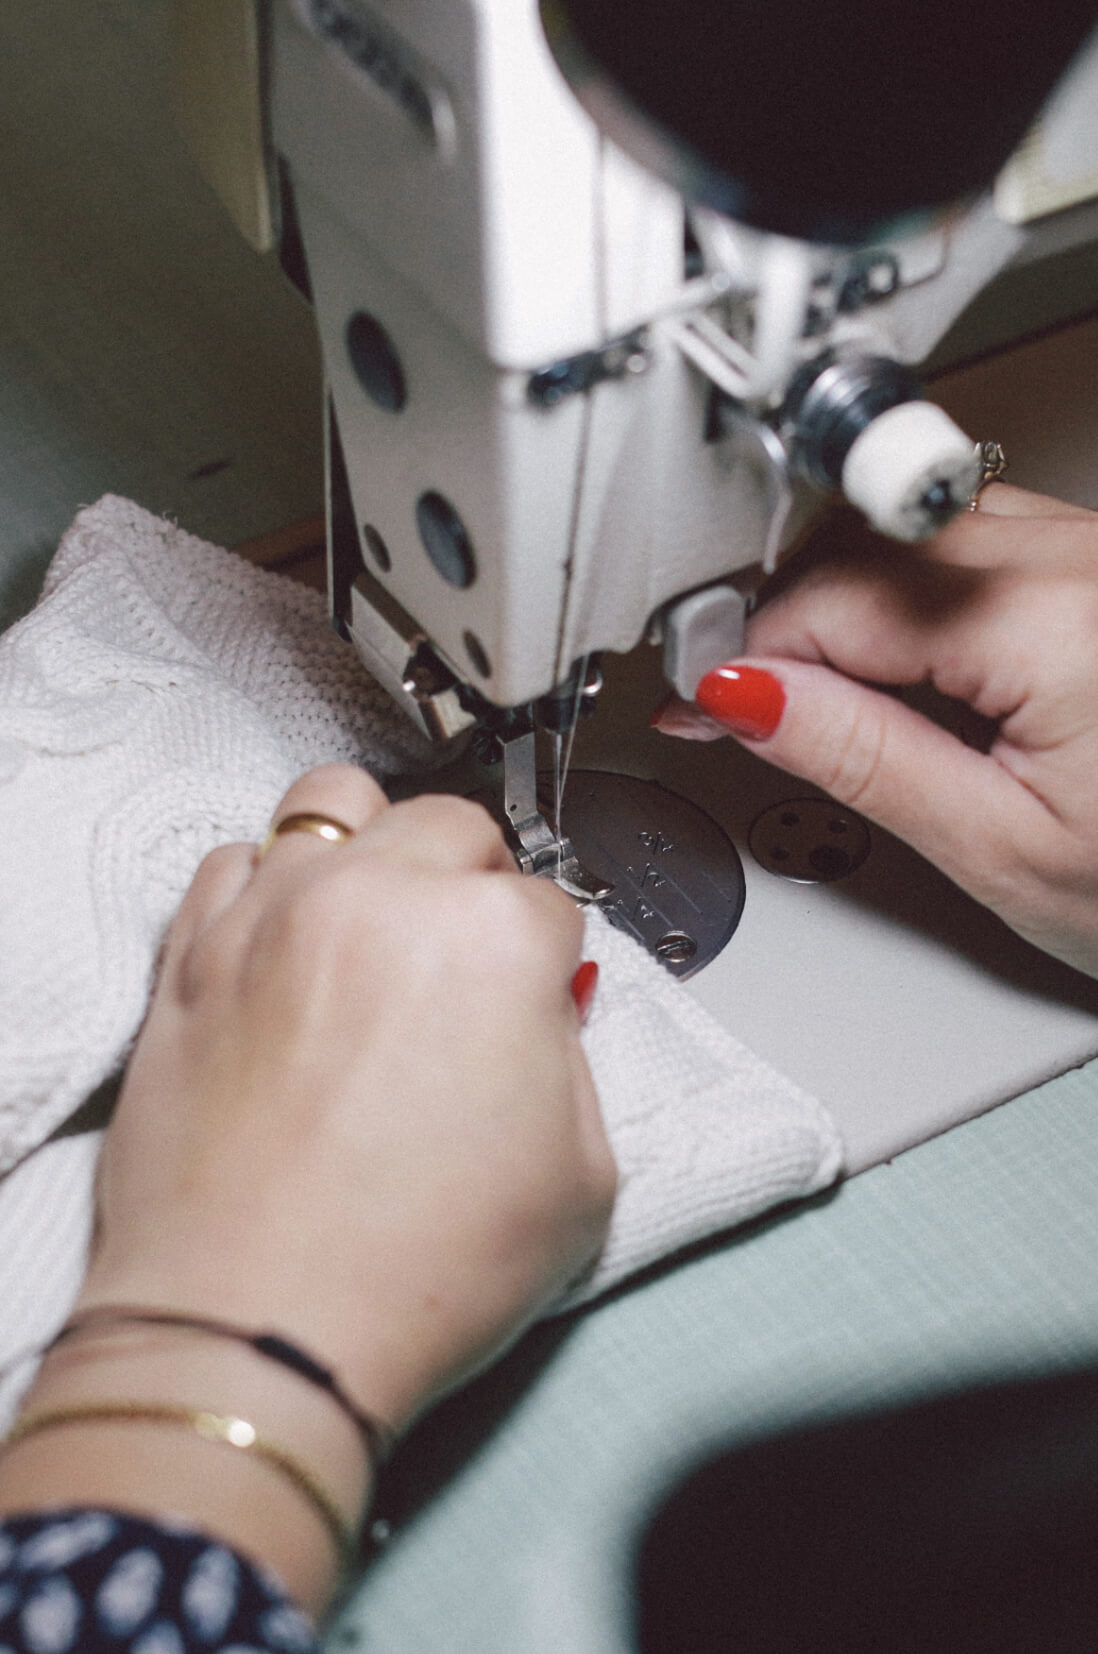 ITALY, Innovation and craftsmanship in knitwear and leather